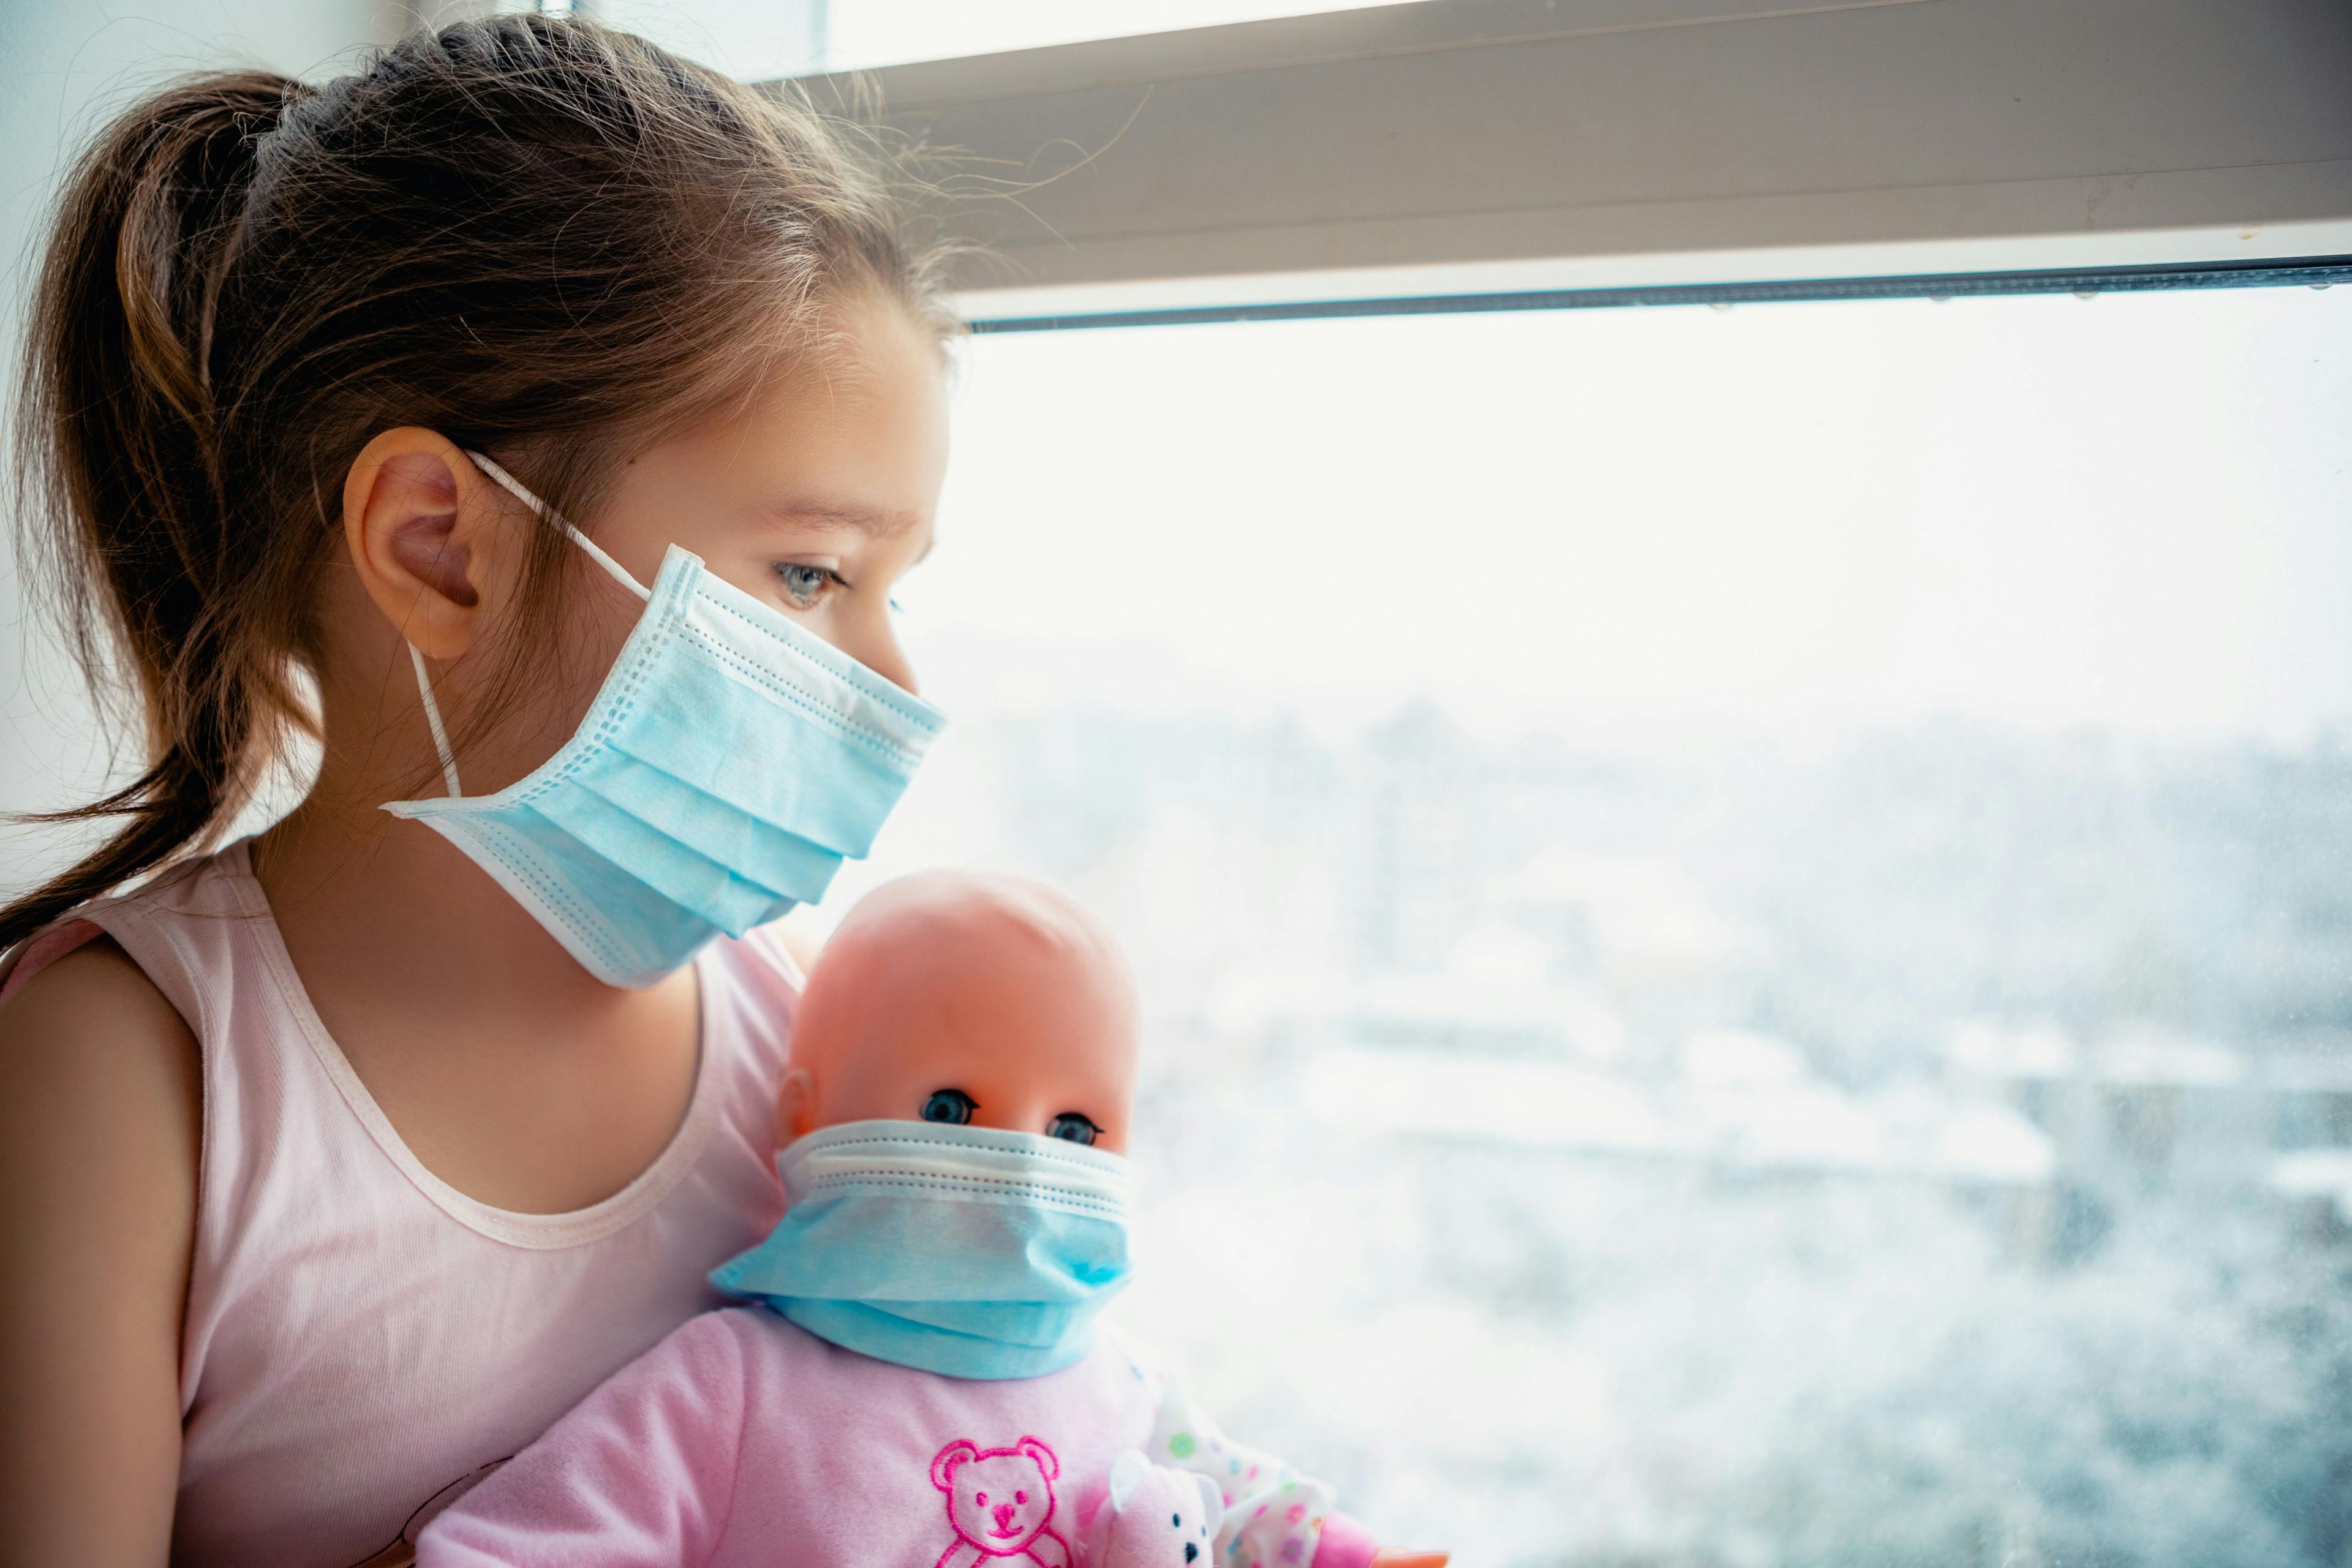 How COVID-19 trends affected respiratory illness rates